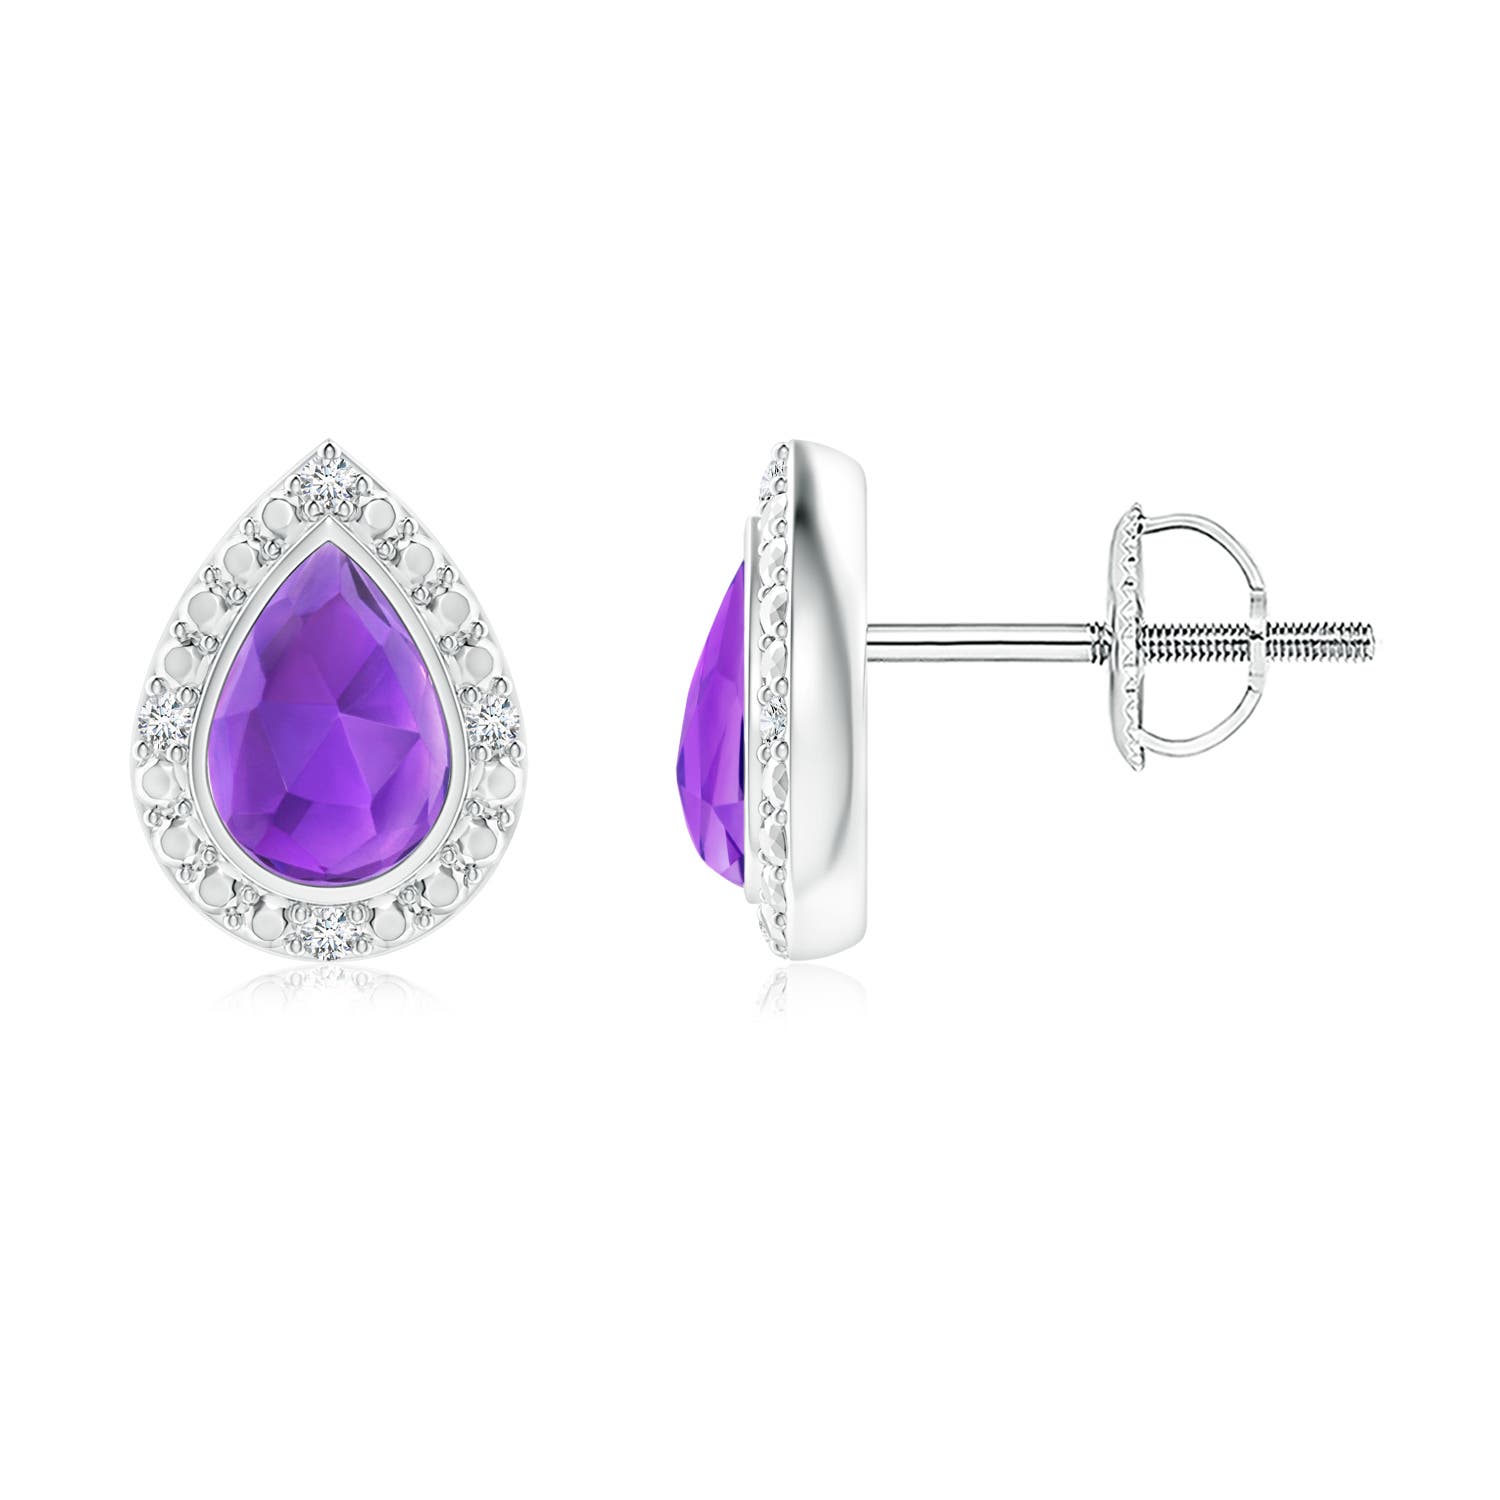 AAA - Amethyst / 0.94 CT / 14 KT White Gold